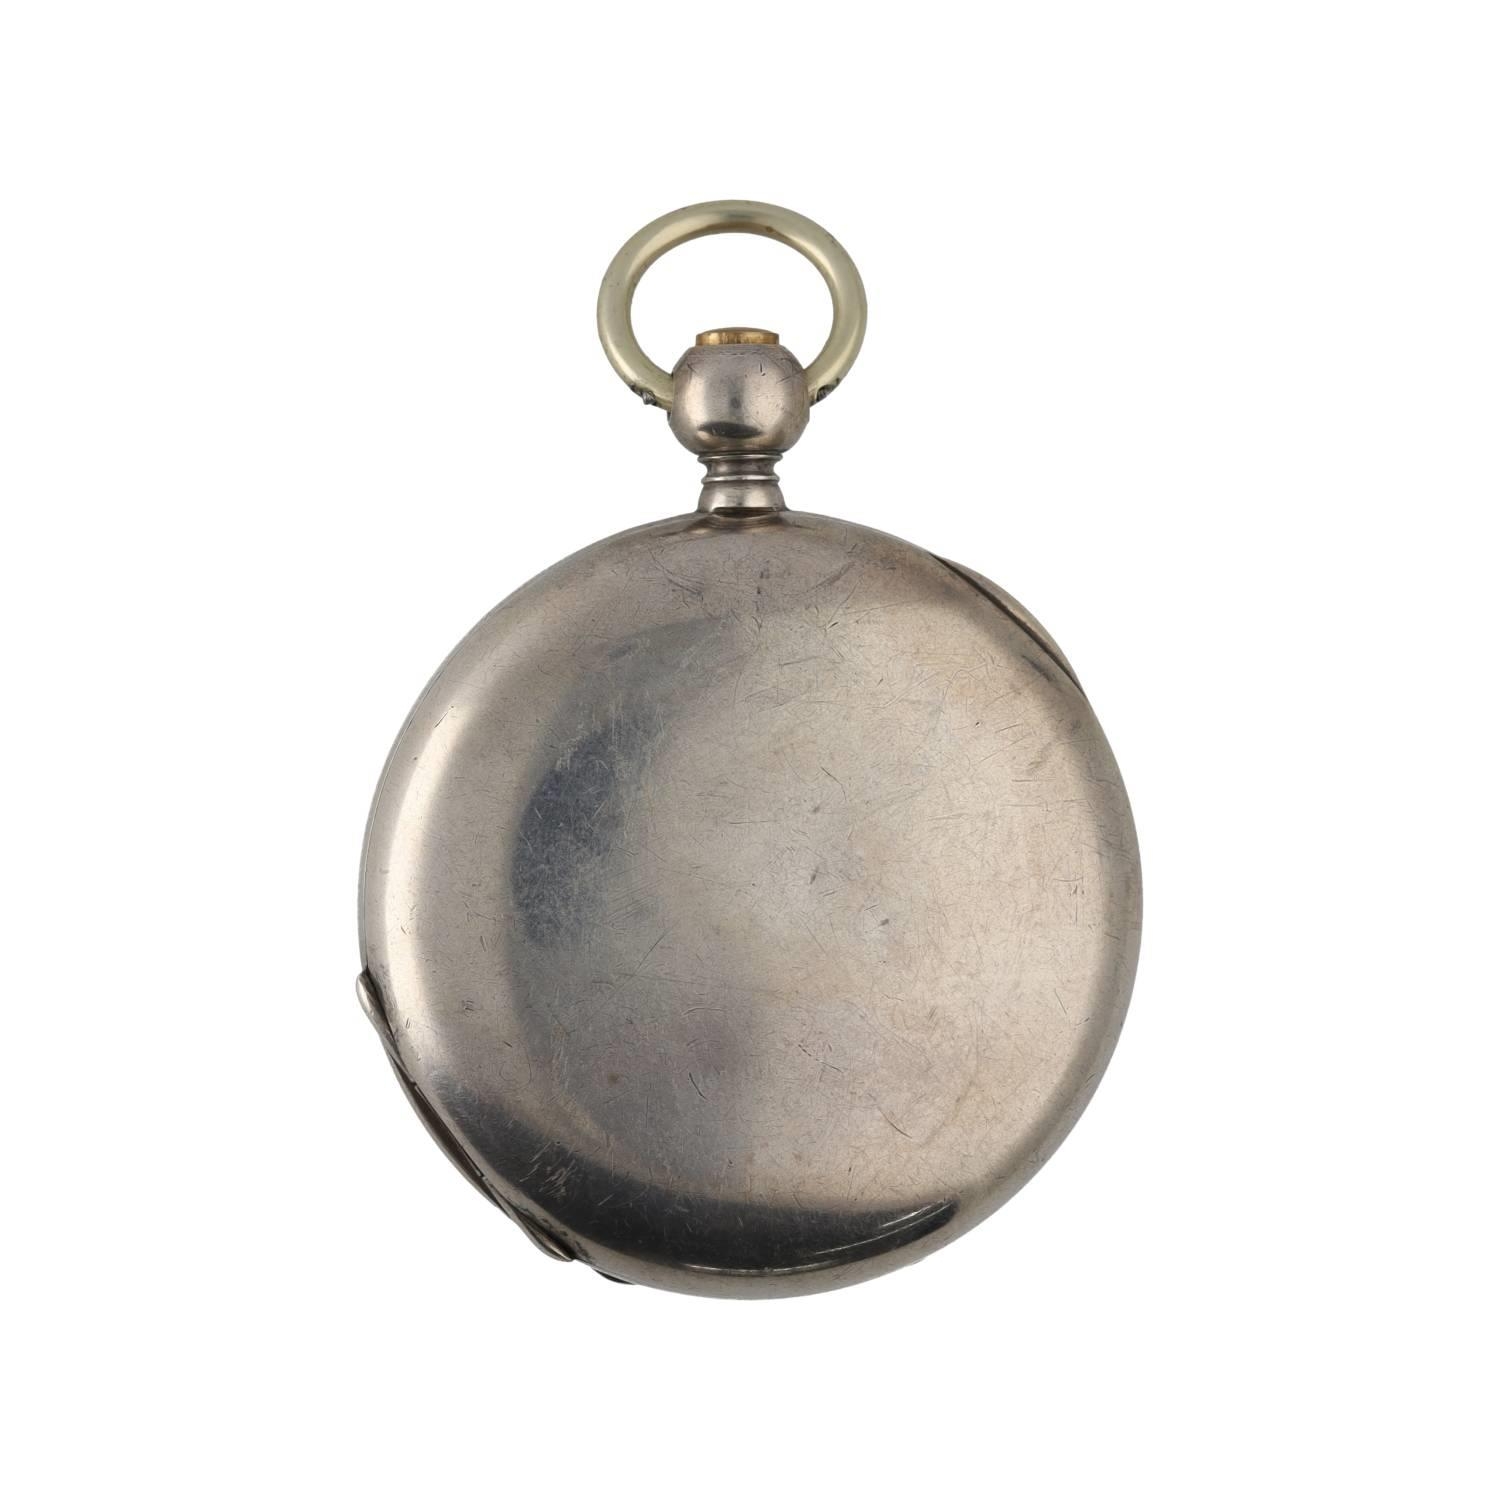 Early American Waltham 'P.S. Bartlett' lever hunter pocket watch, circa 1864, serial no. 148734, - Image 4 of 4